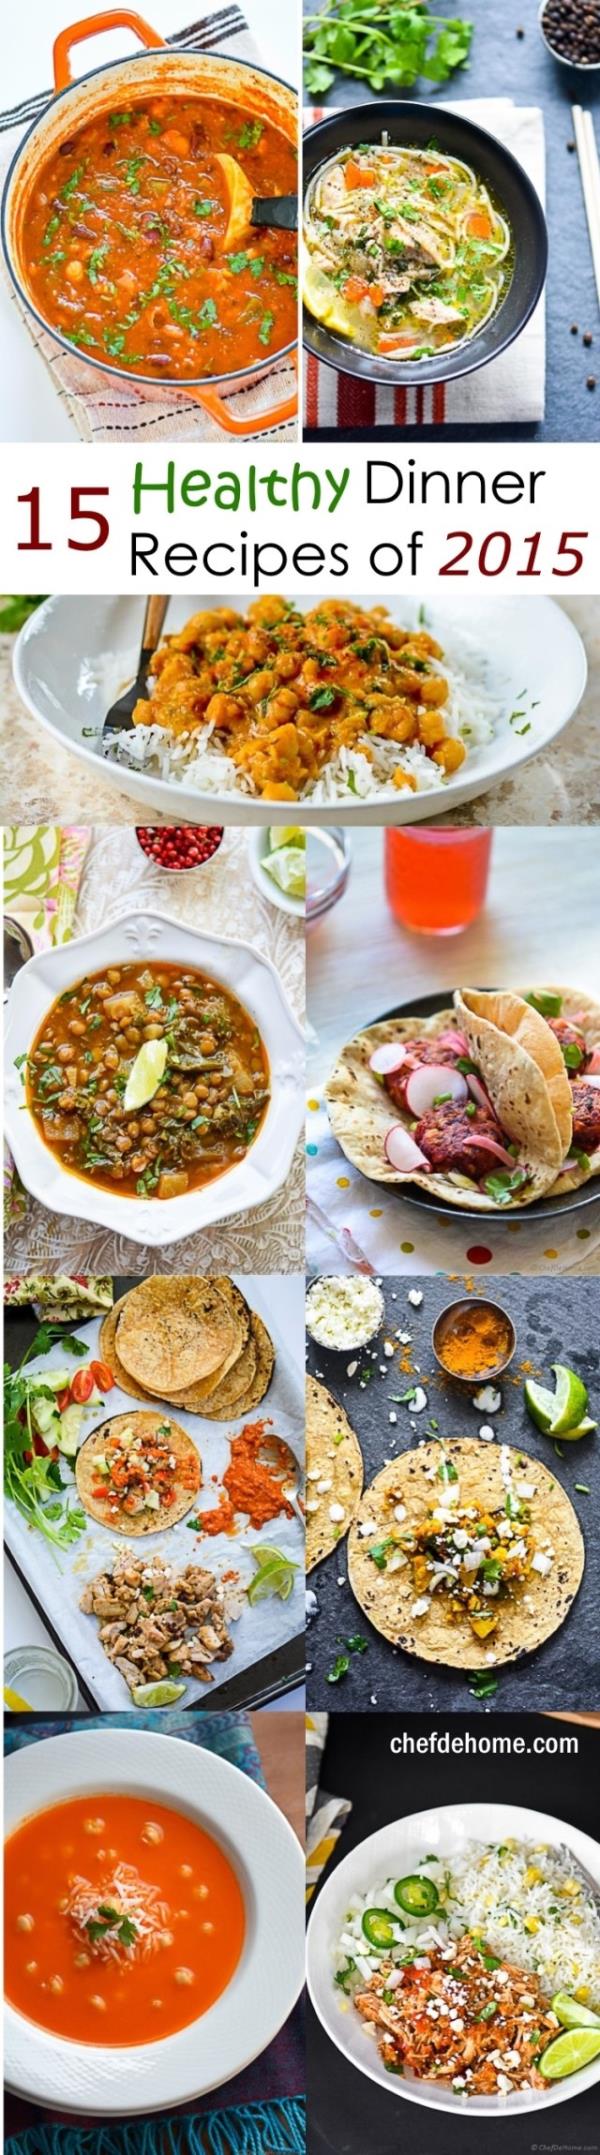 15 Top Healthy Dinner Recipes for New Year Meals - ChefDeHome.com